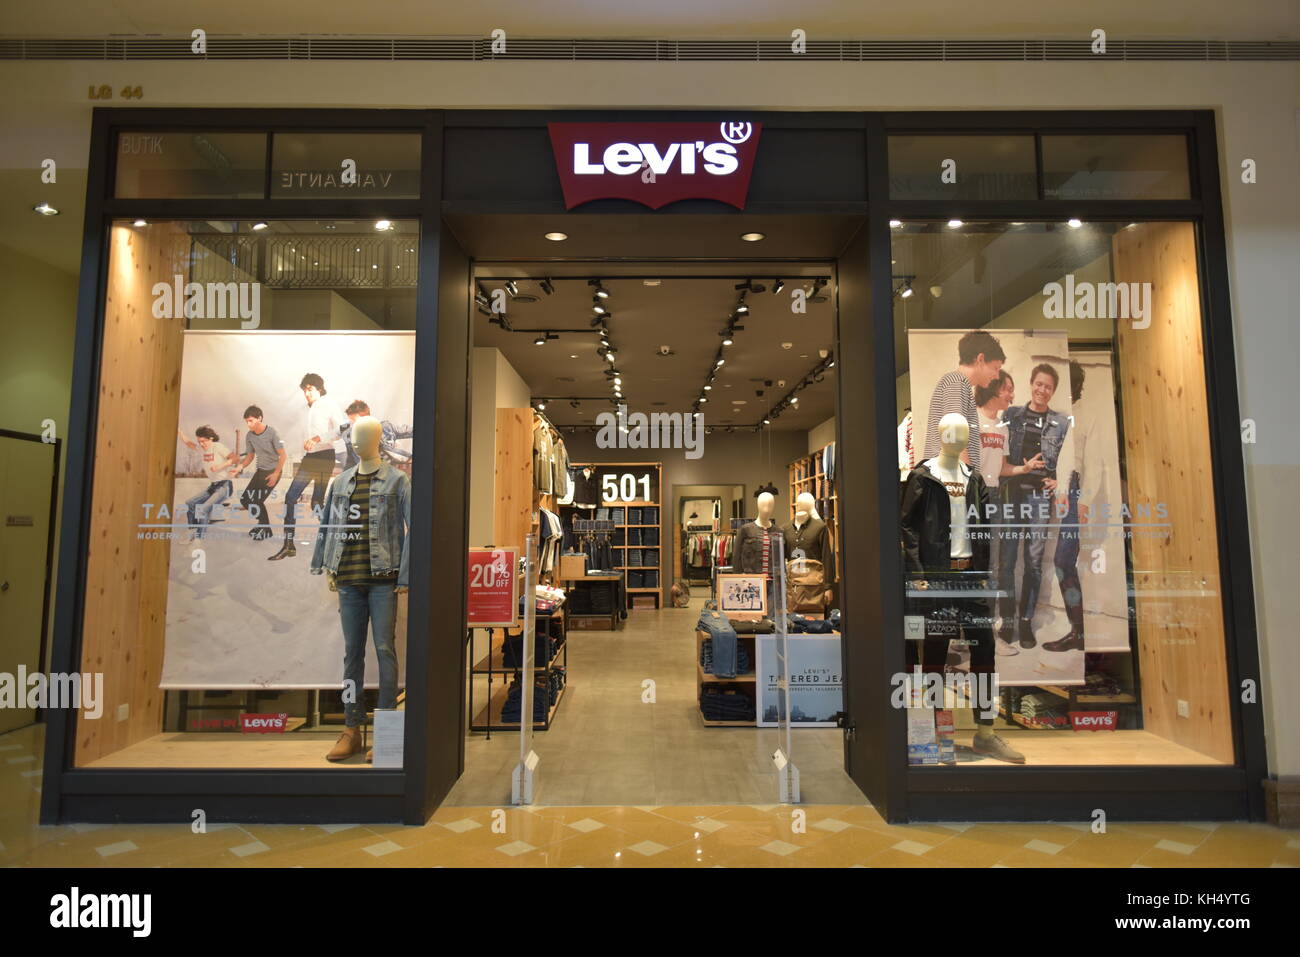 Levi's Outlet Clearance, 56% OFF | lagence.tv